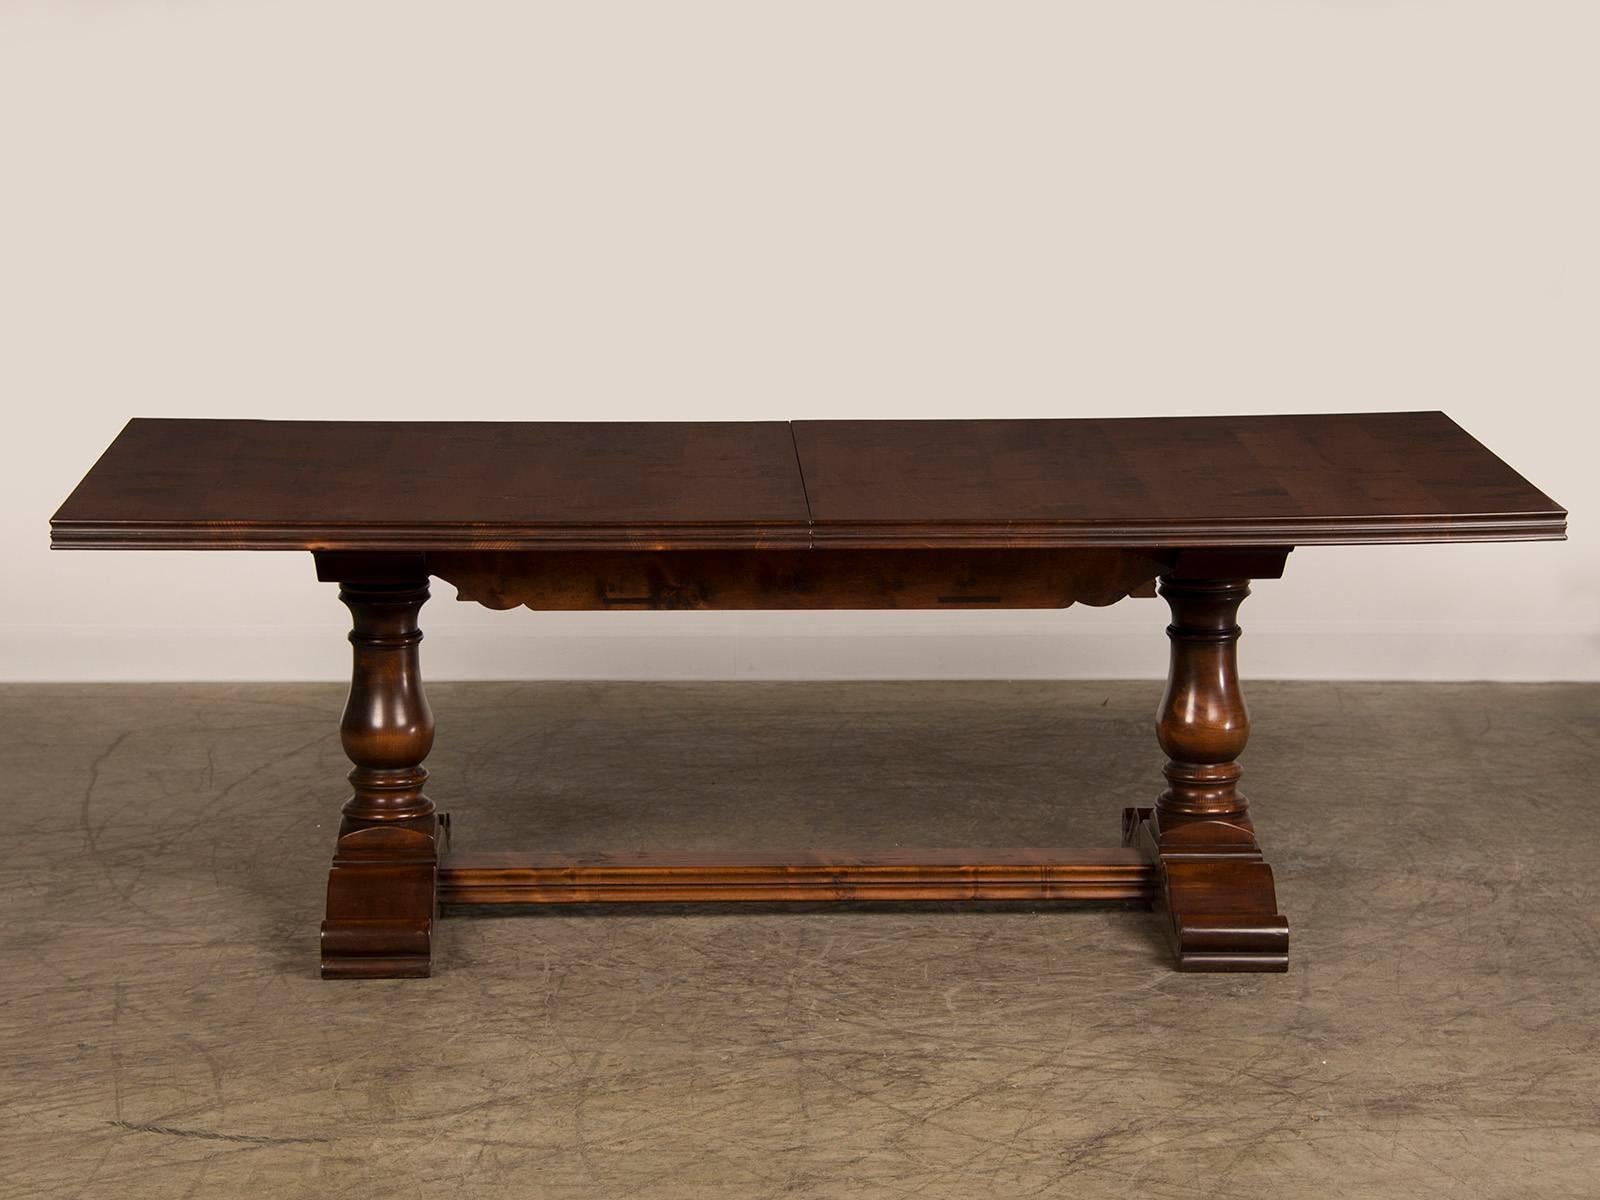 Renaissance English Hand-Planed, Waxed Cherrywood Trestle Dining Table with Three Leaves